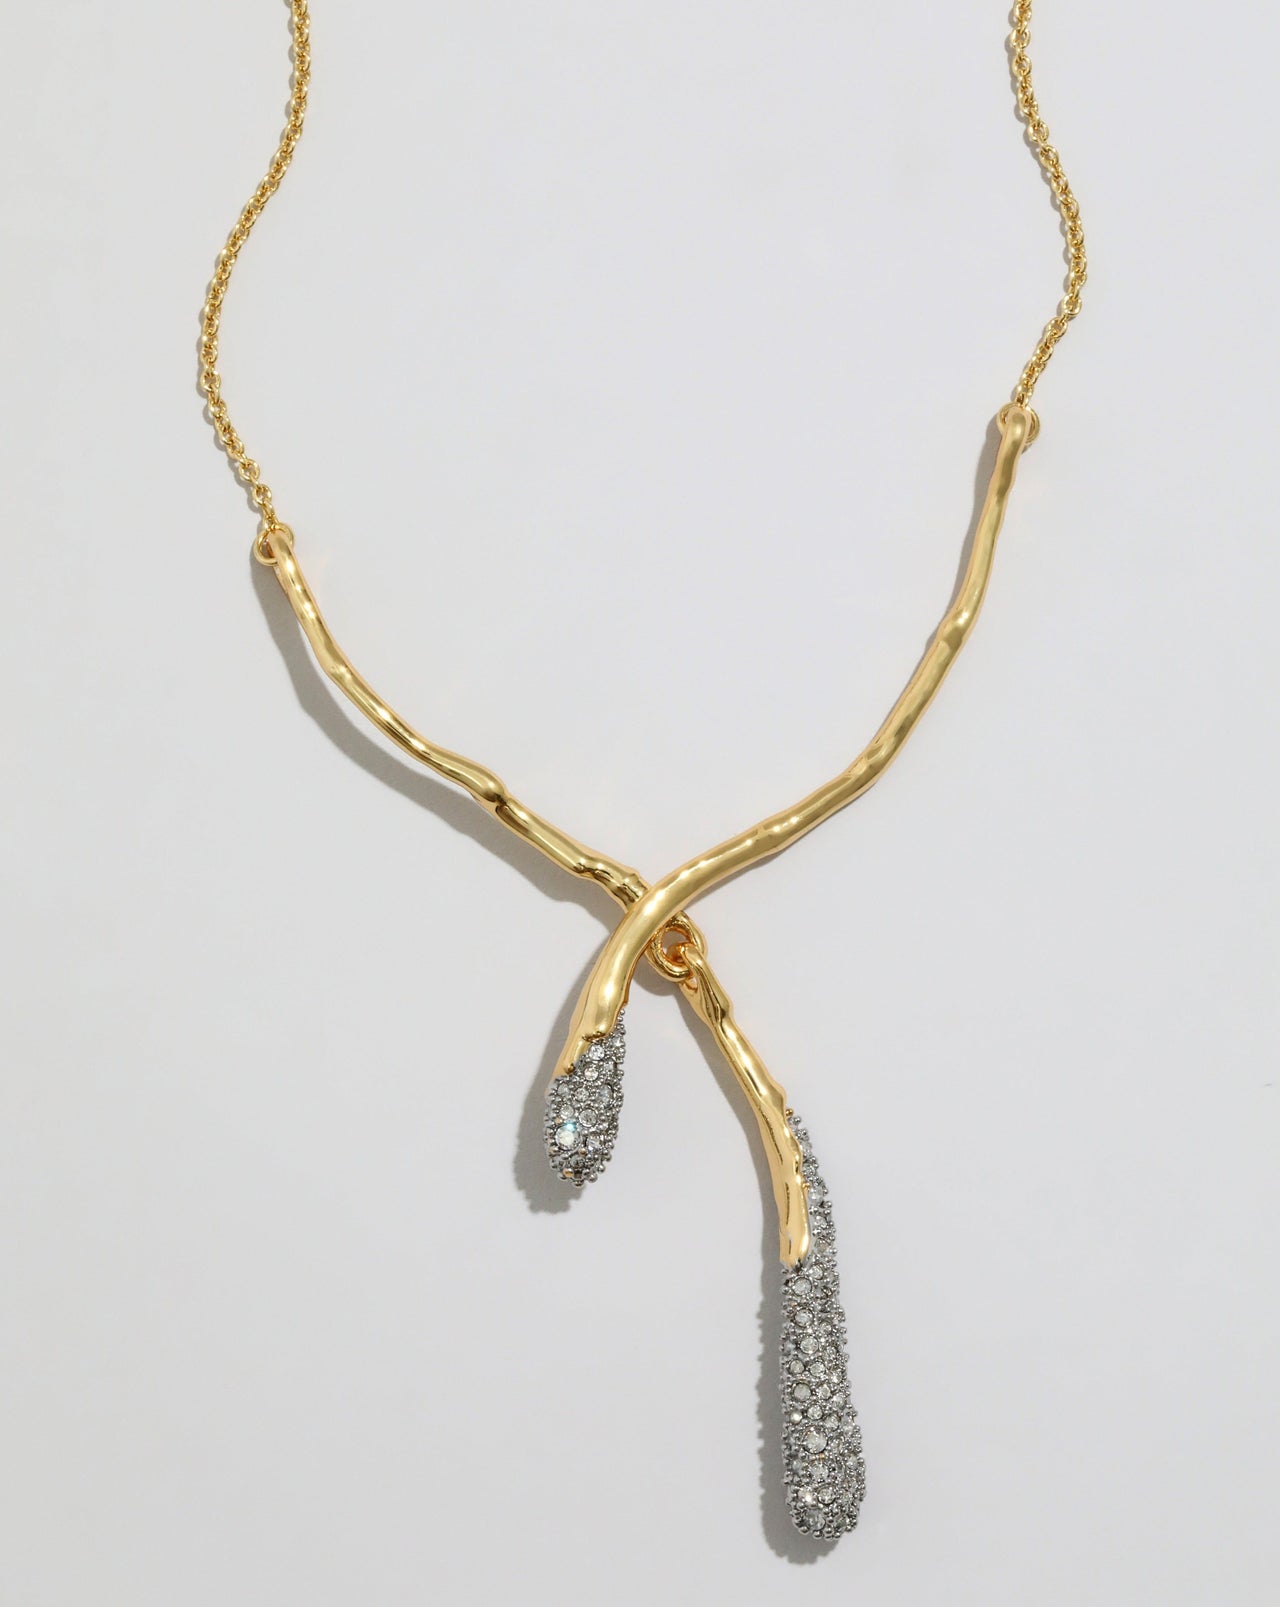 Solanales Gold Crystal Cascade Necklace - Photo 2